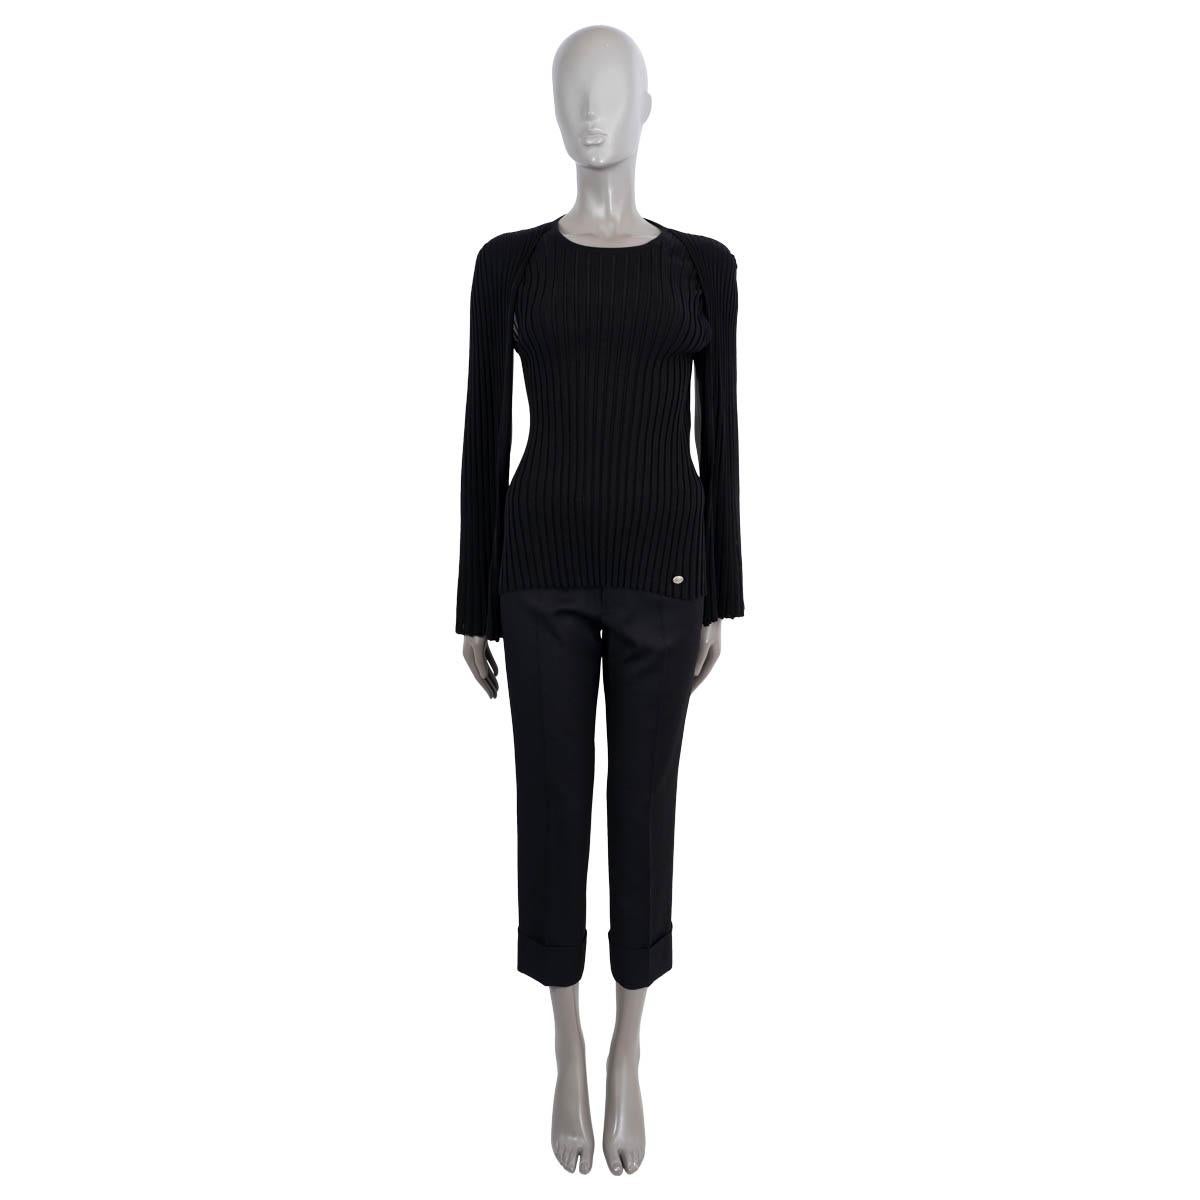 100% authentic Chanel rib-knit sweater in black wool (100%). Features a round neck, long cape sleeves and antique silver-tone coin button at the waist. Brand new with tags. 

2016 Paris-Rome Metiers d'Art

Measurements
Model	16A P54458 K07085 
Tag